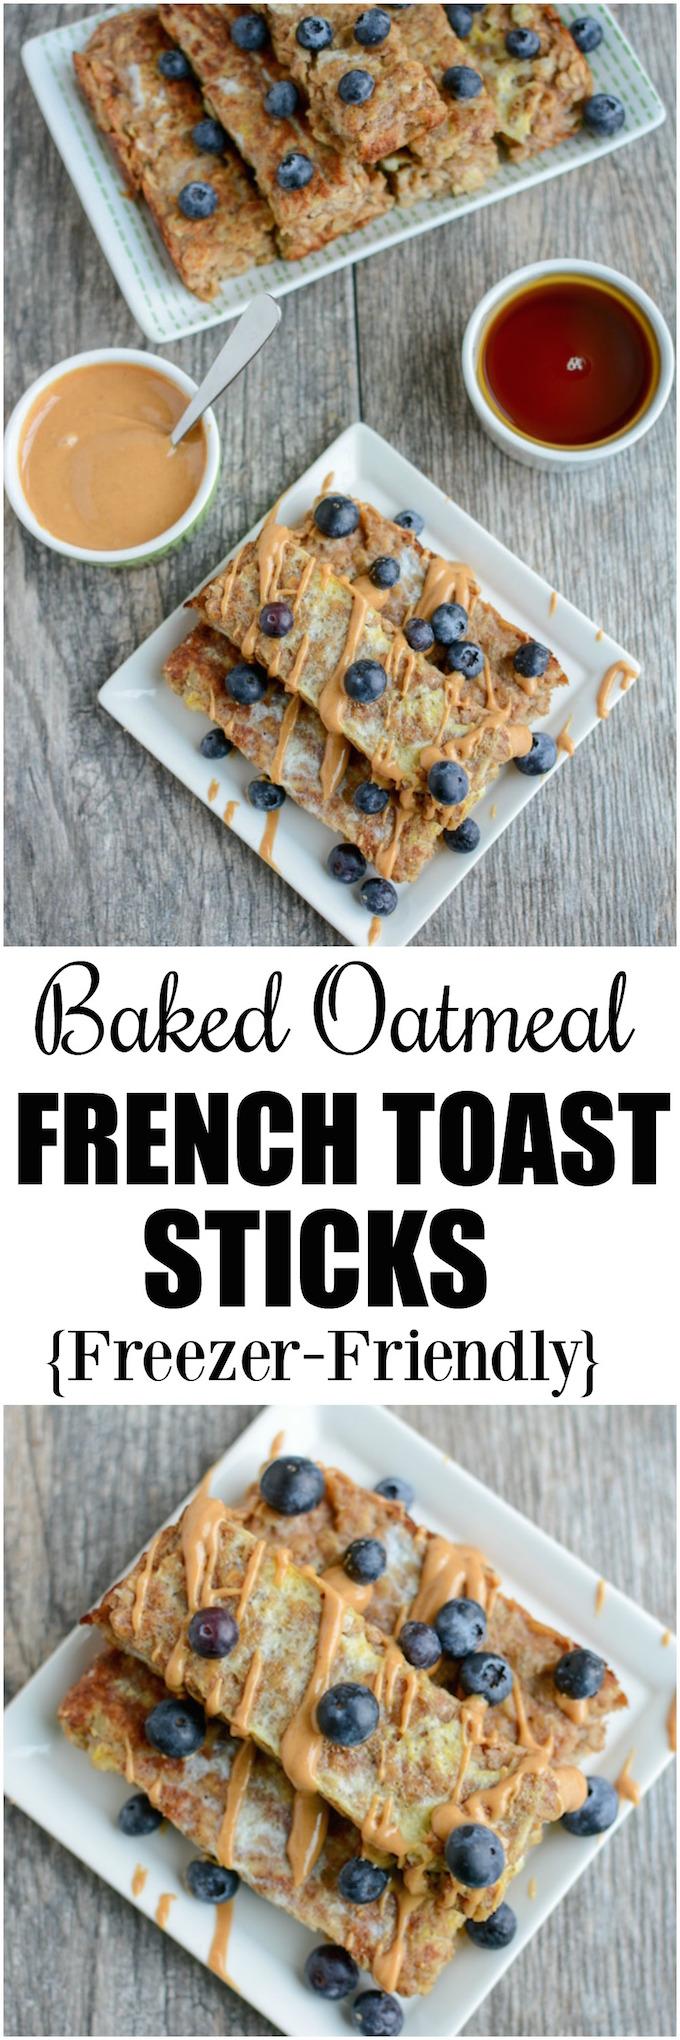 These Banana Baked Oatmeal French Toast Sticks are a healthy, gluten-free, kid-friendly breakfast recipe. They can even be made ahead of time, stored in the freezer and reheated in the microwave!